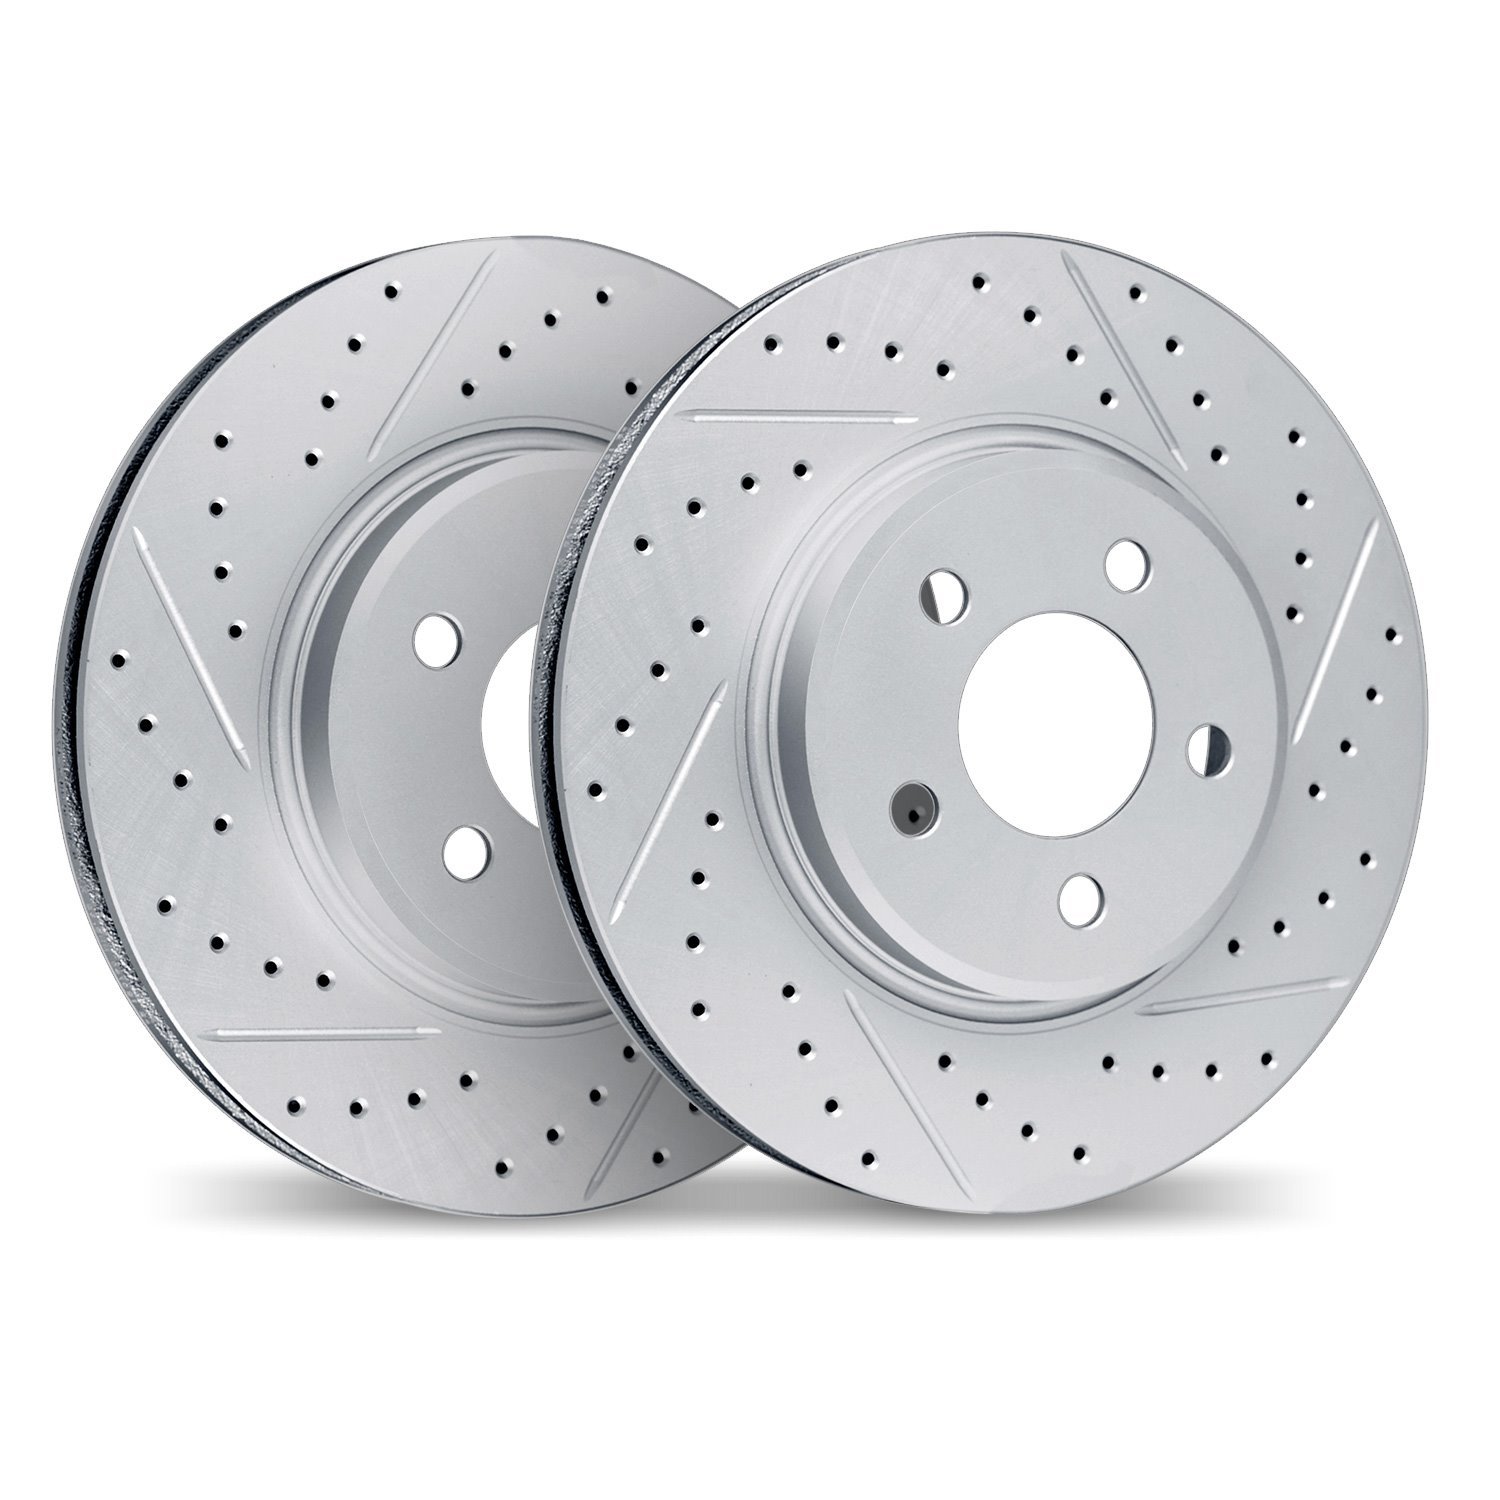 2002-76032 Geoperformance Drilled/Slotted Brake Rotors, 2001-2005 Lexus/Toyota/Scion, Position: Front